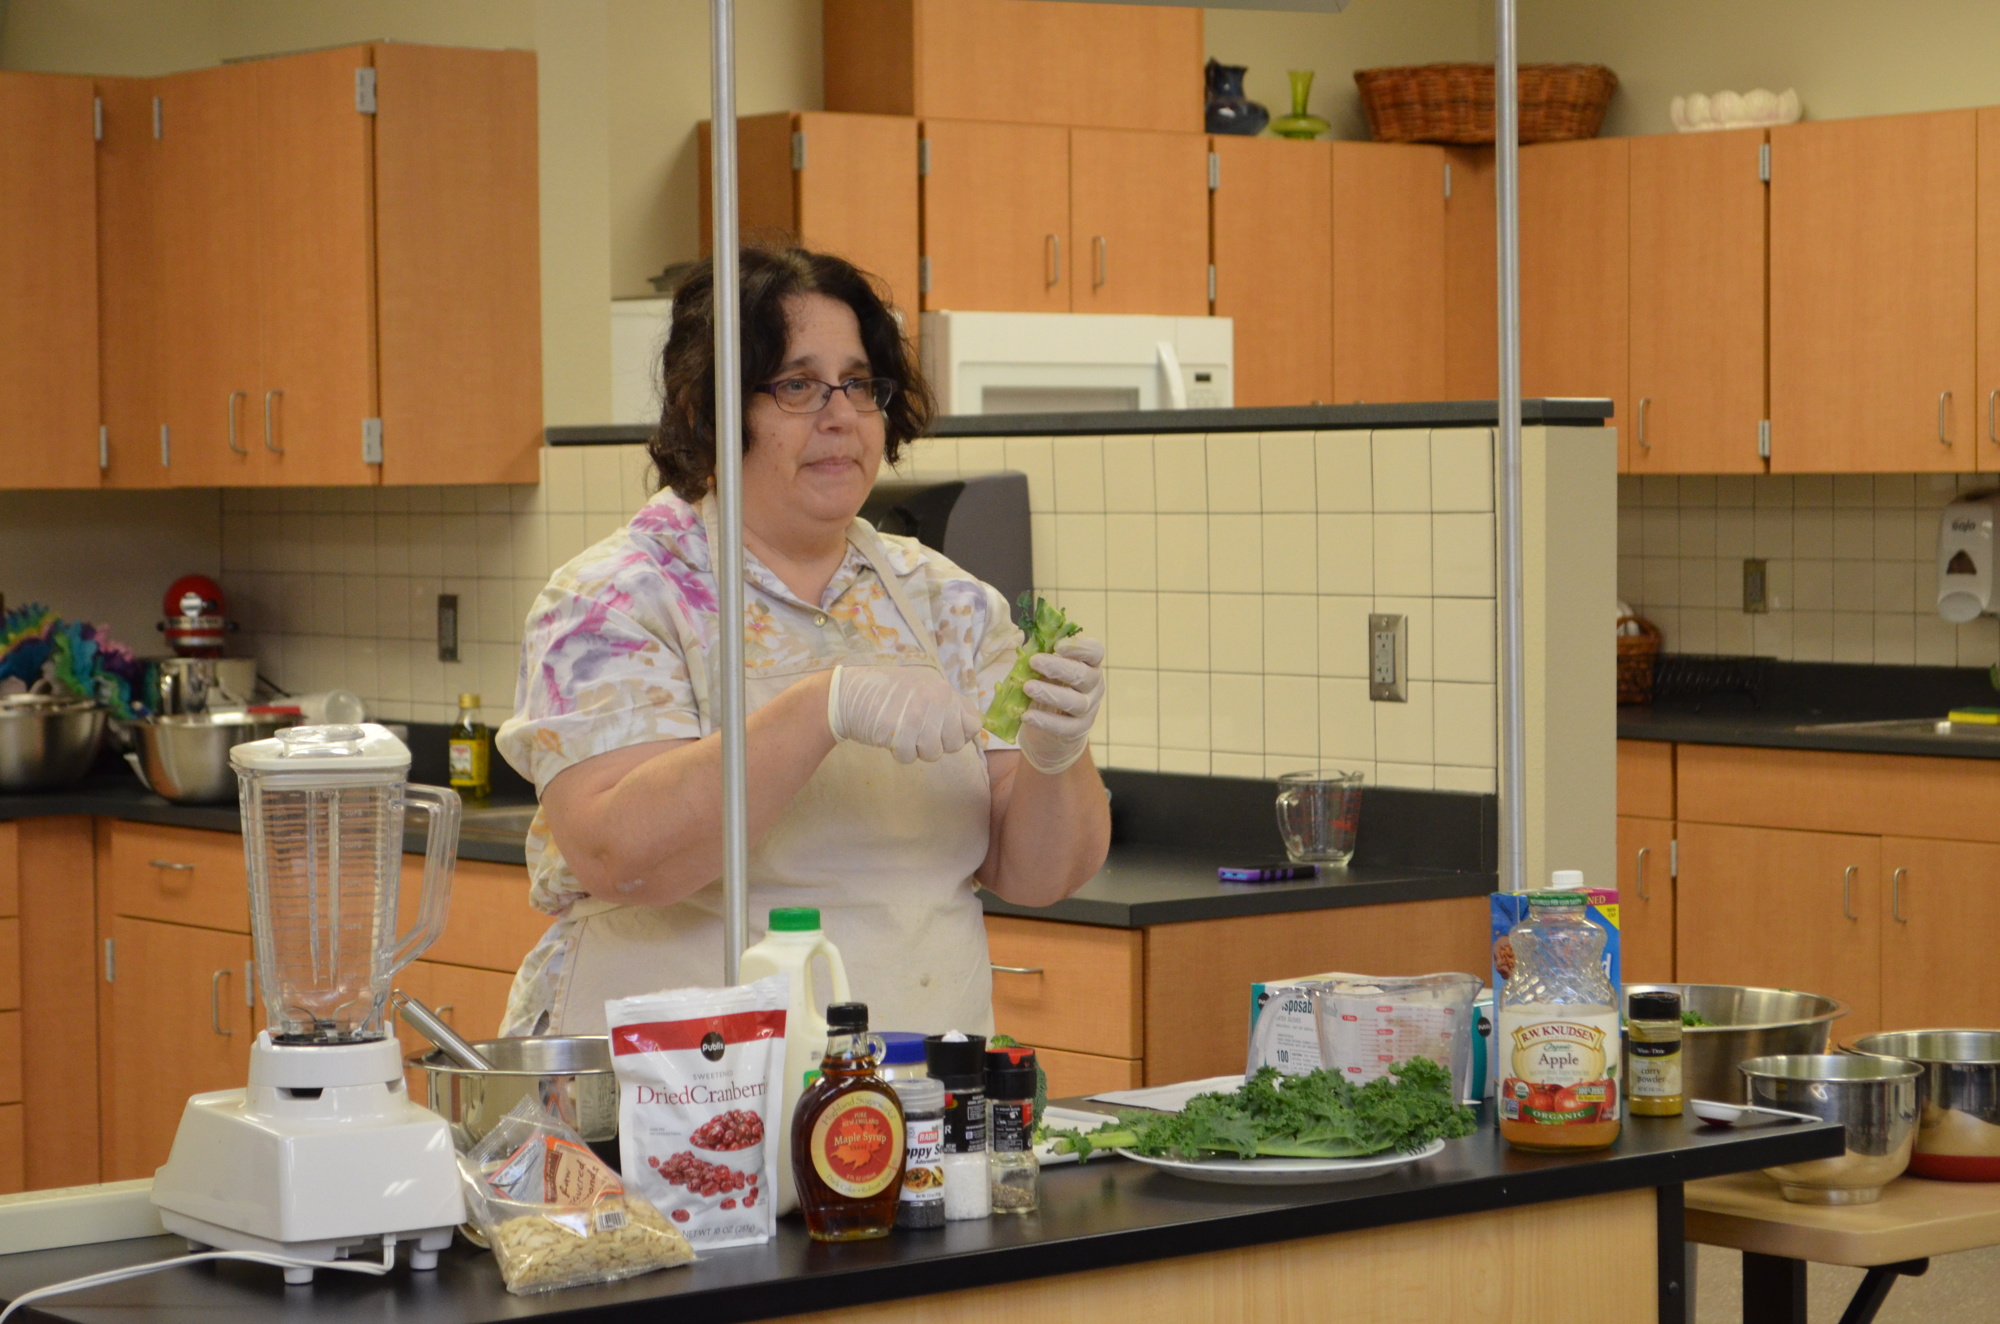 Instructor Robin Rosen leads the class demonstration during the Lifelong Learning Showcase at Suncoast Technical College Friday, Sept. 16.